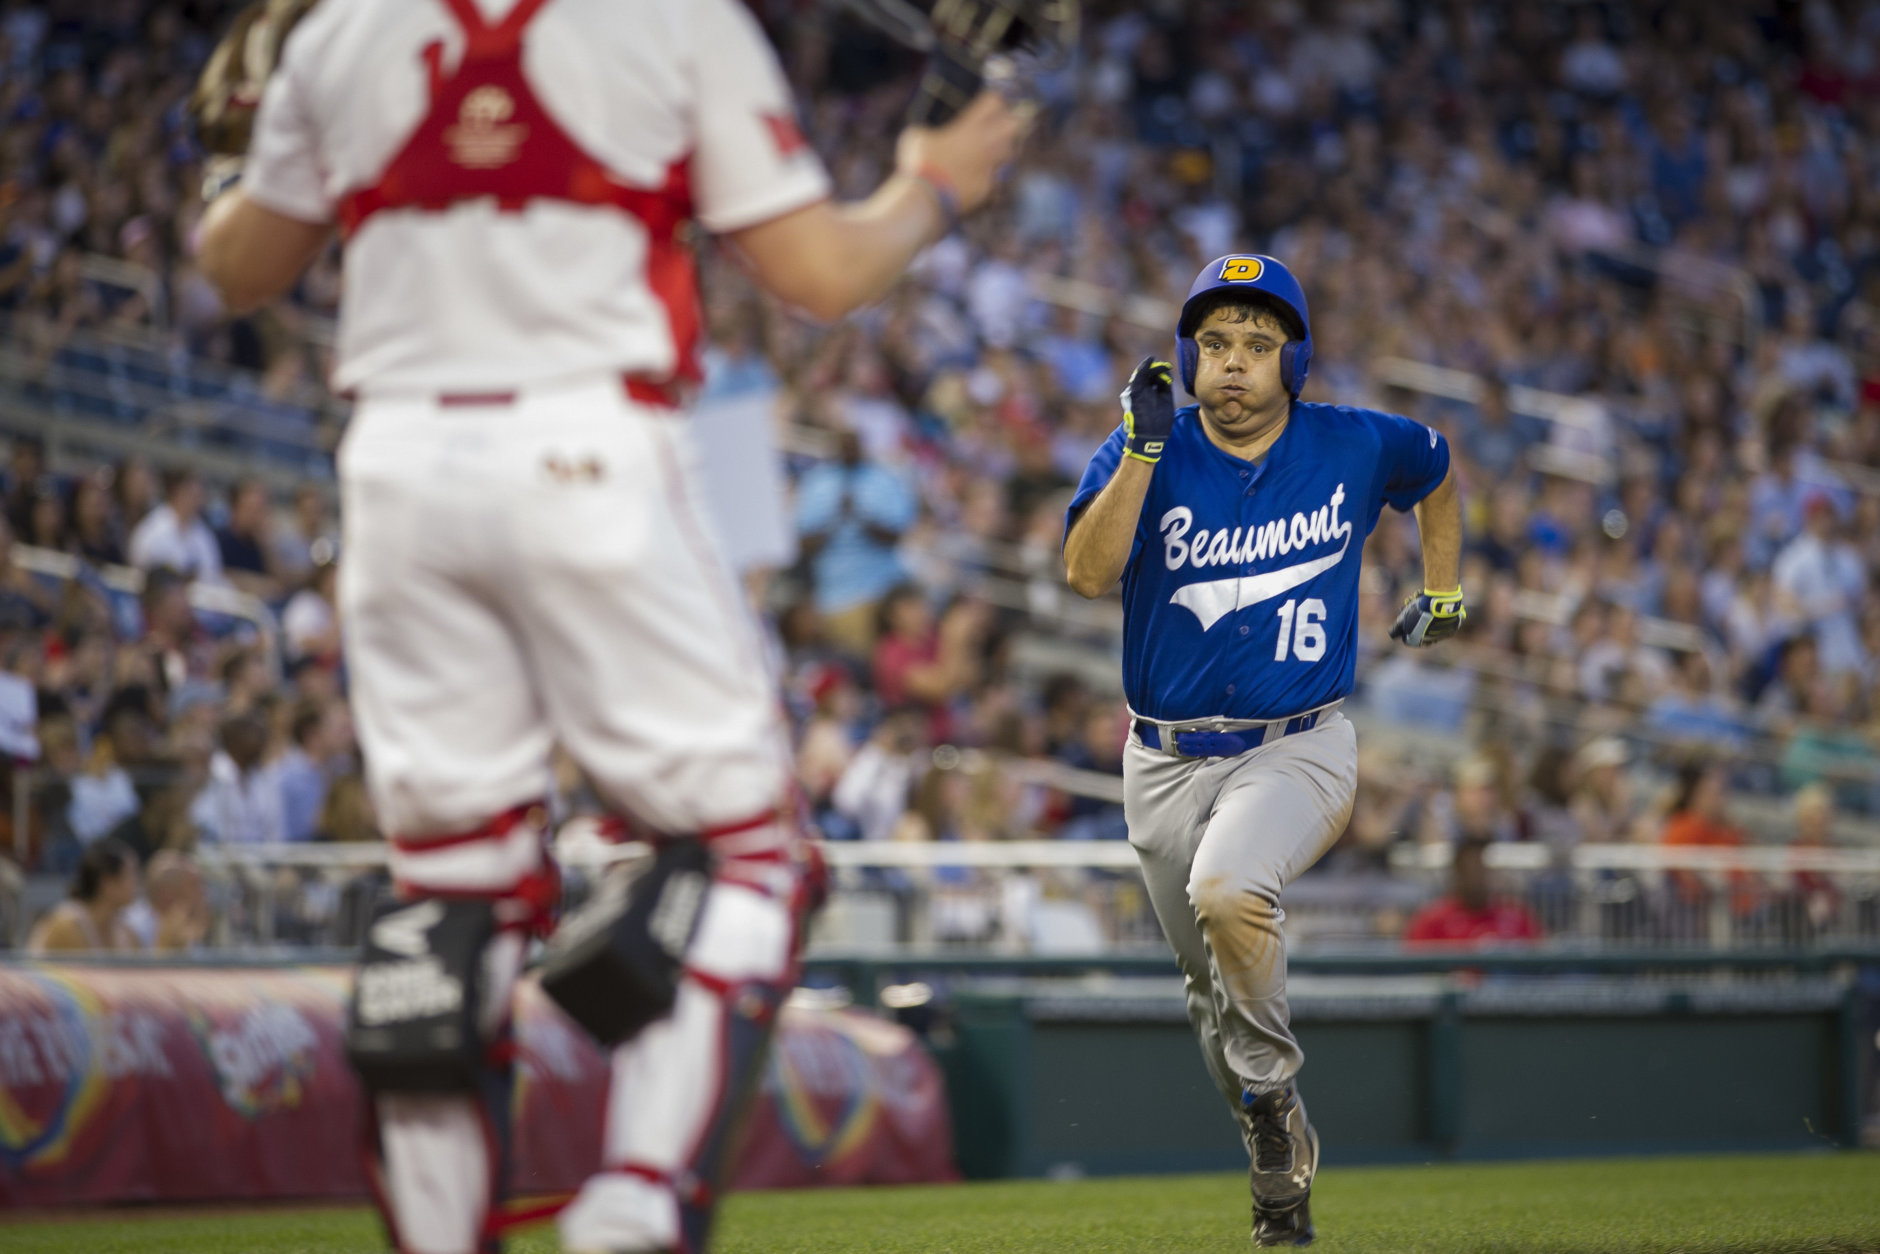 U.S. Rep. Raul Ruiz, D-California, runs for home plate after stealing home base in the fifth inning of the 57th Congressional Baseball Game at National's Park in Washington, Thursday, June 14, 2018. On June 14, 2017, Congressional members were victims of a shooting at the baseball field they were practicing on in Alexandria, Va. (AP Photo/Cliff Owen)